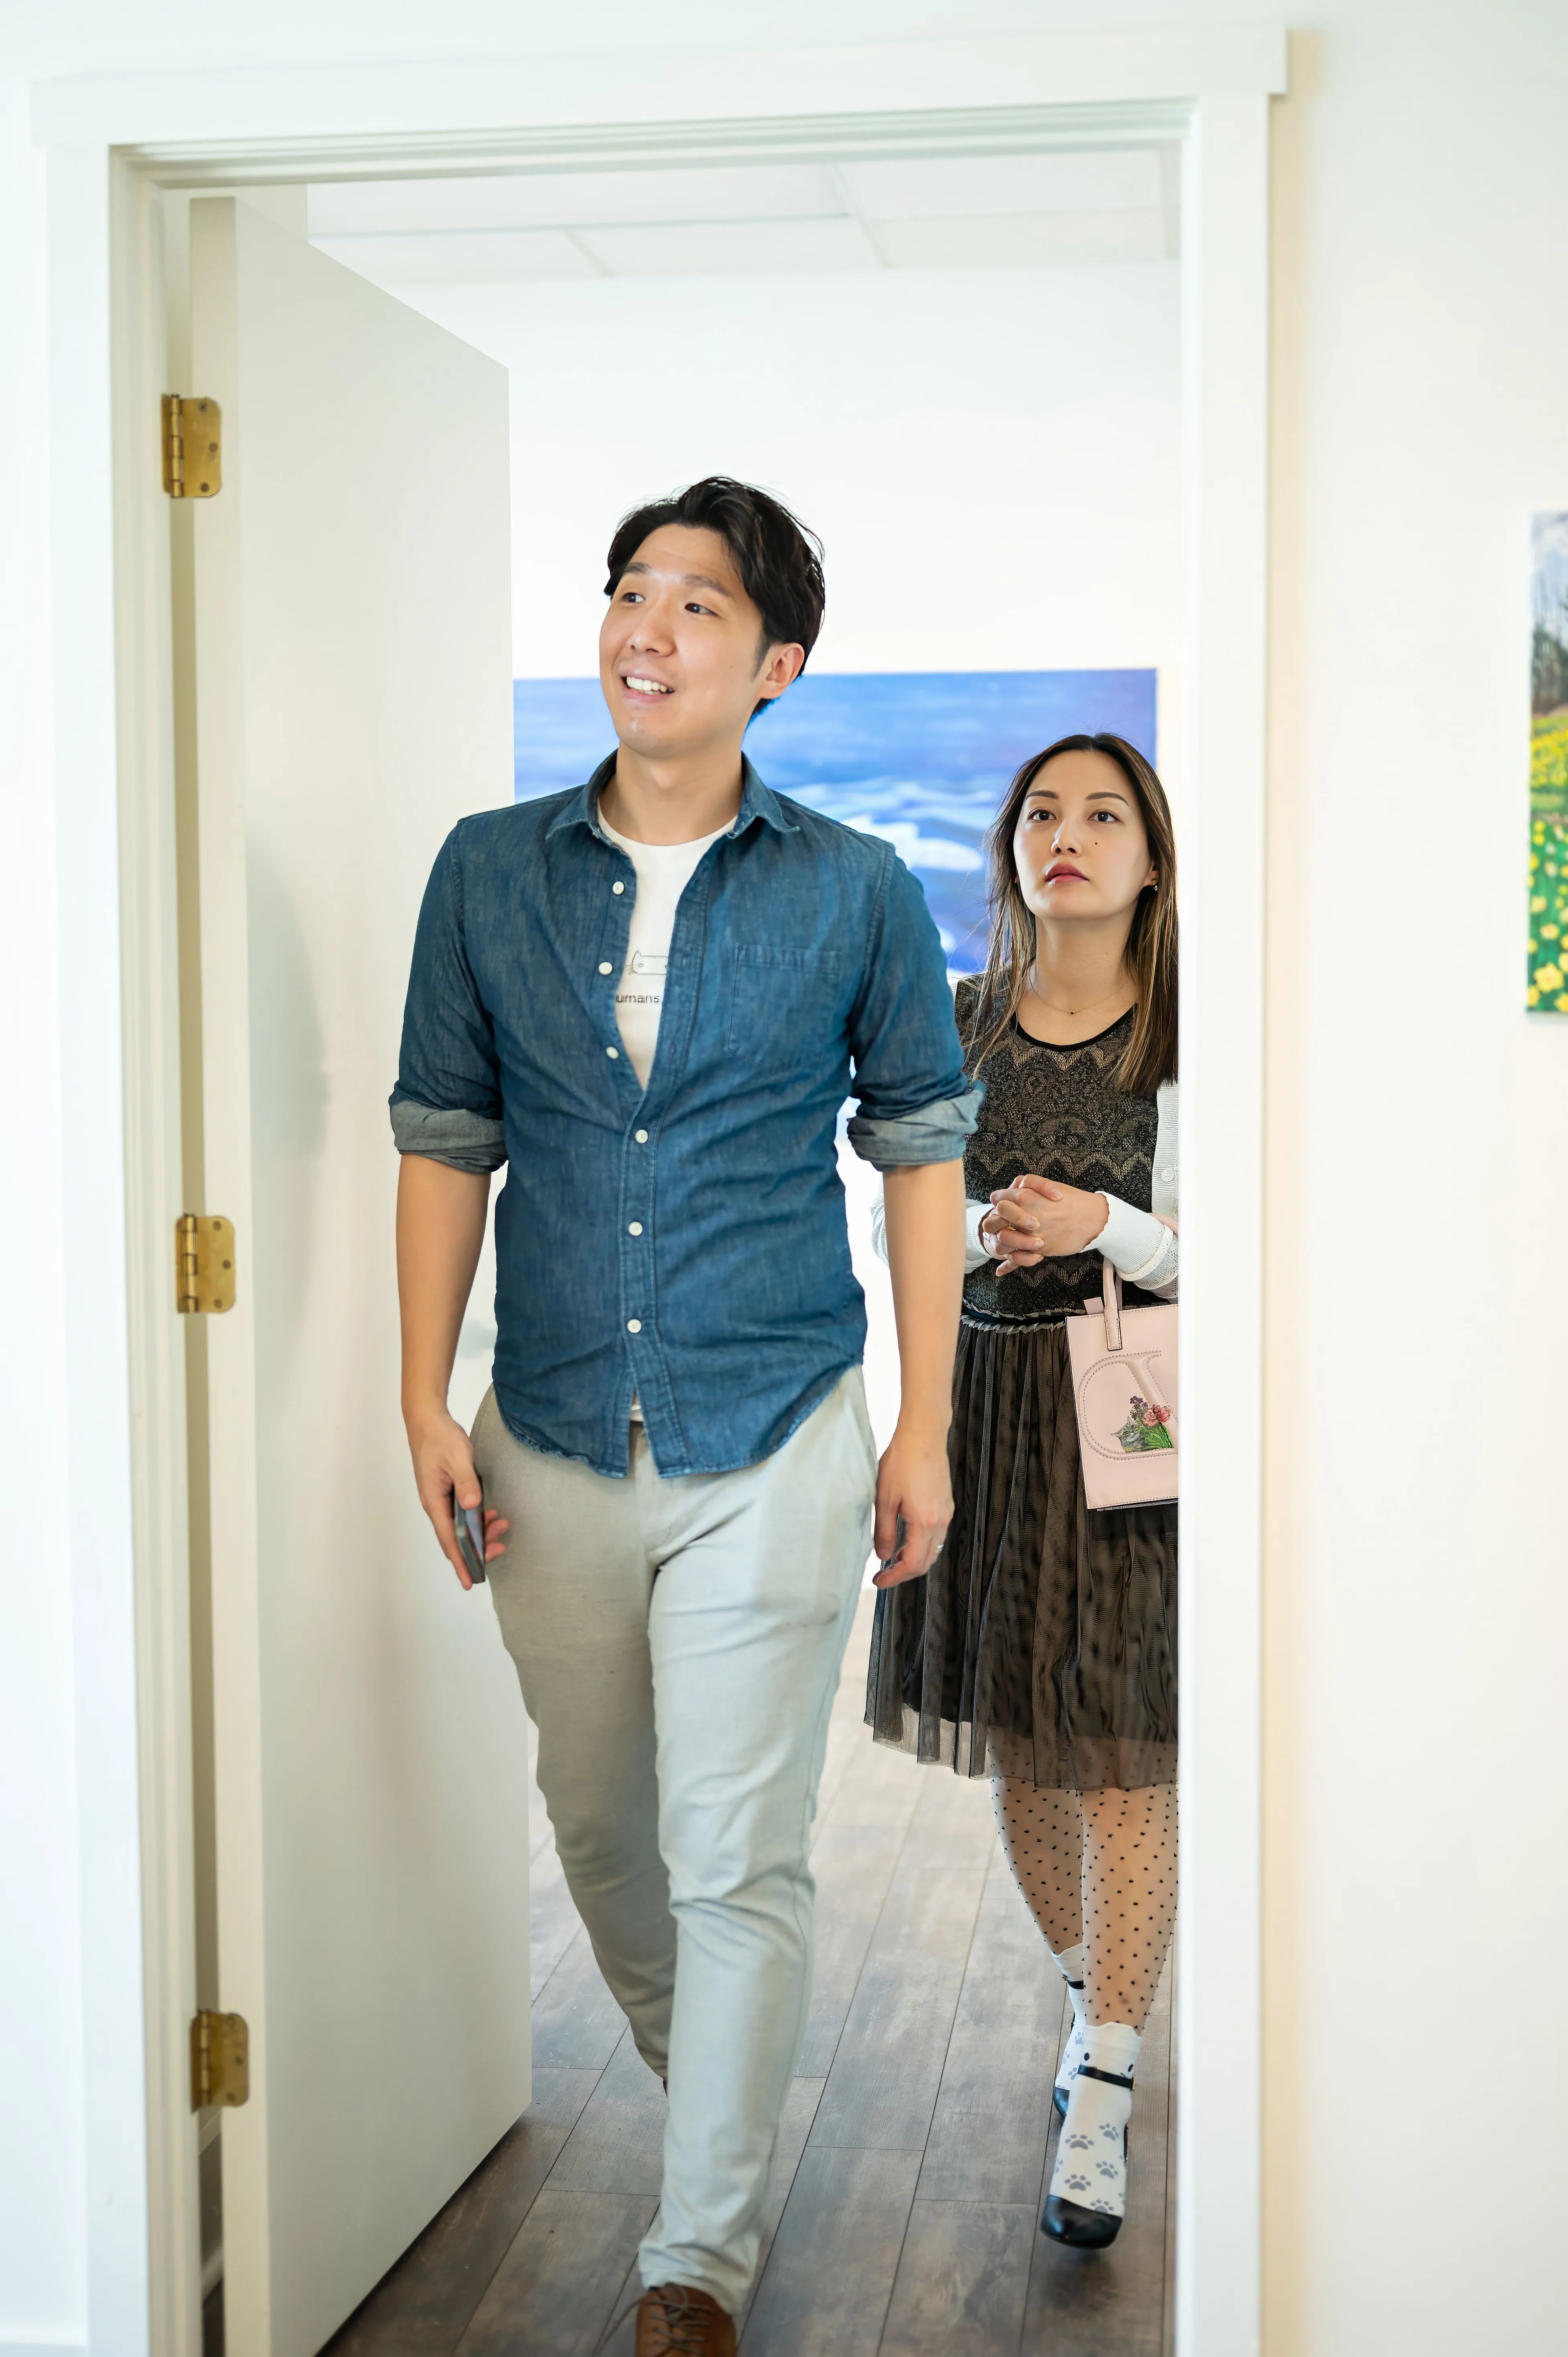 Man and woman walking through a doorway into a bright room.